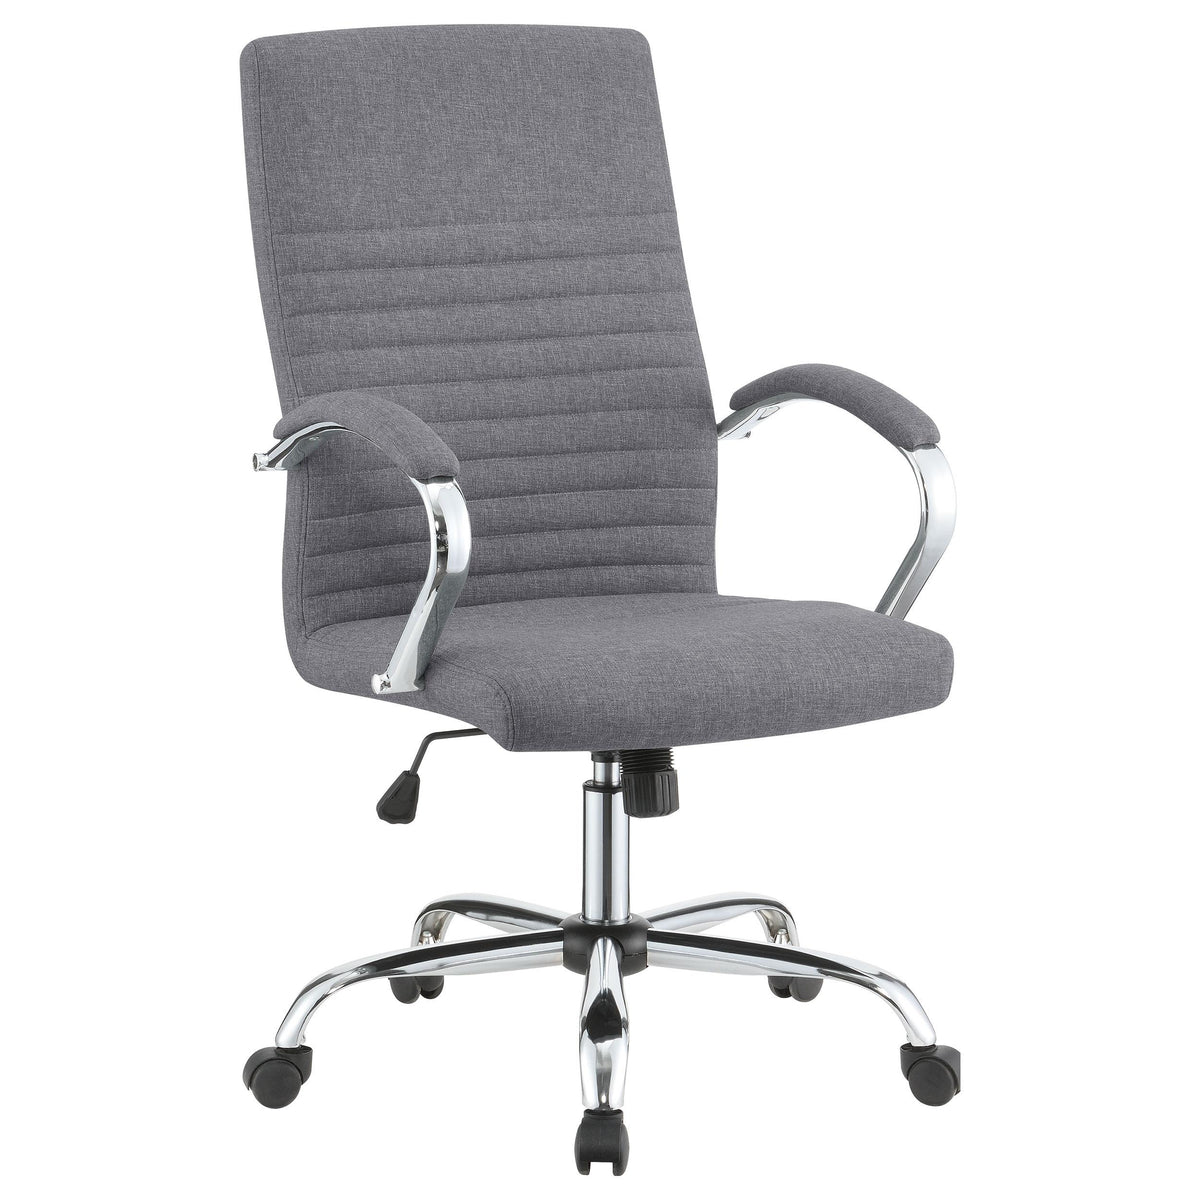 Abisko Upholstered Office Chair with Casters Grey and Chrome  Half Price Furniture